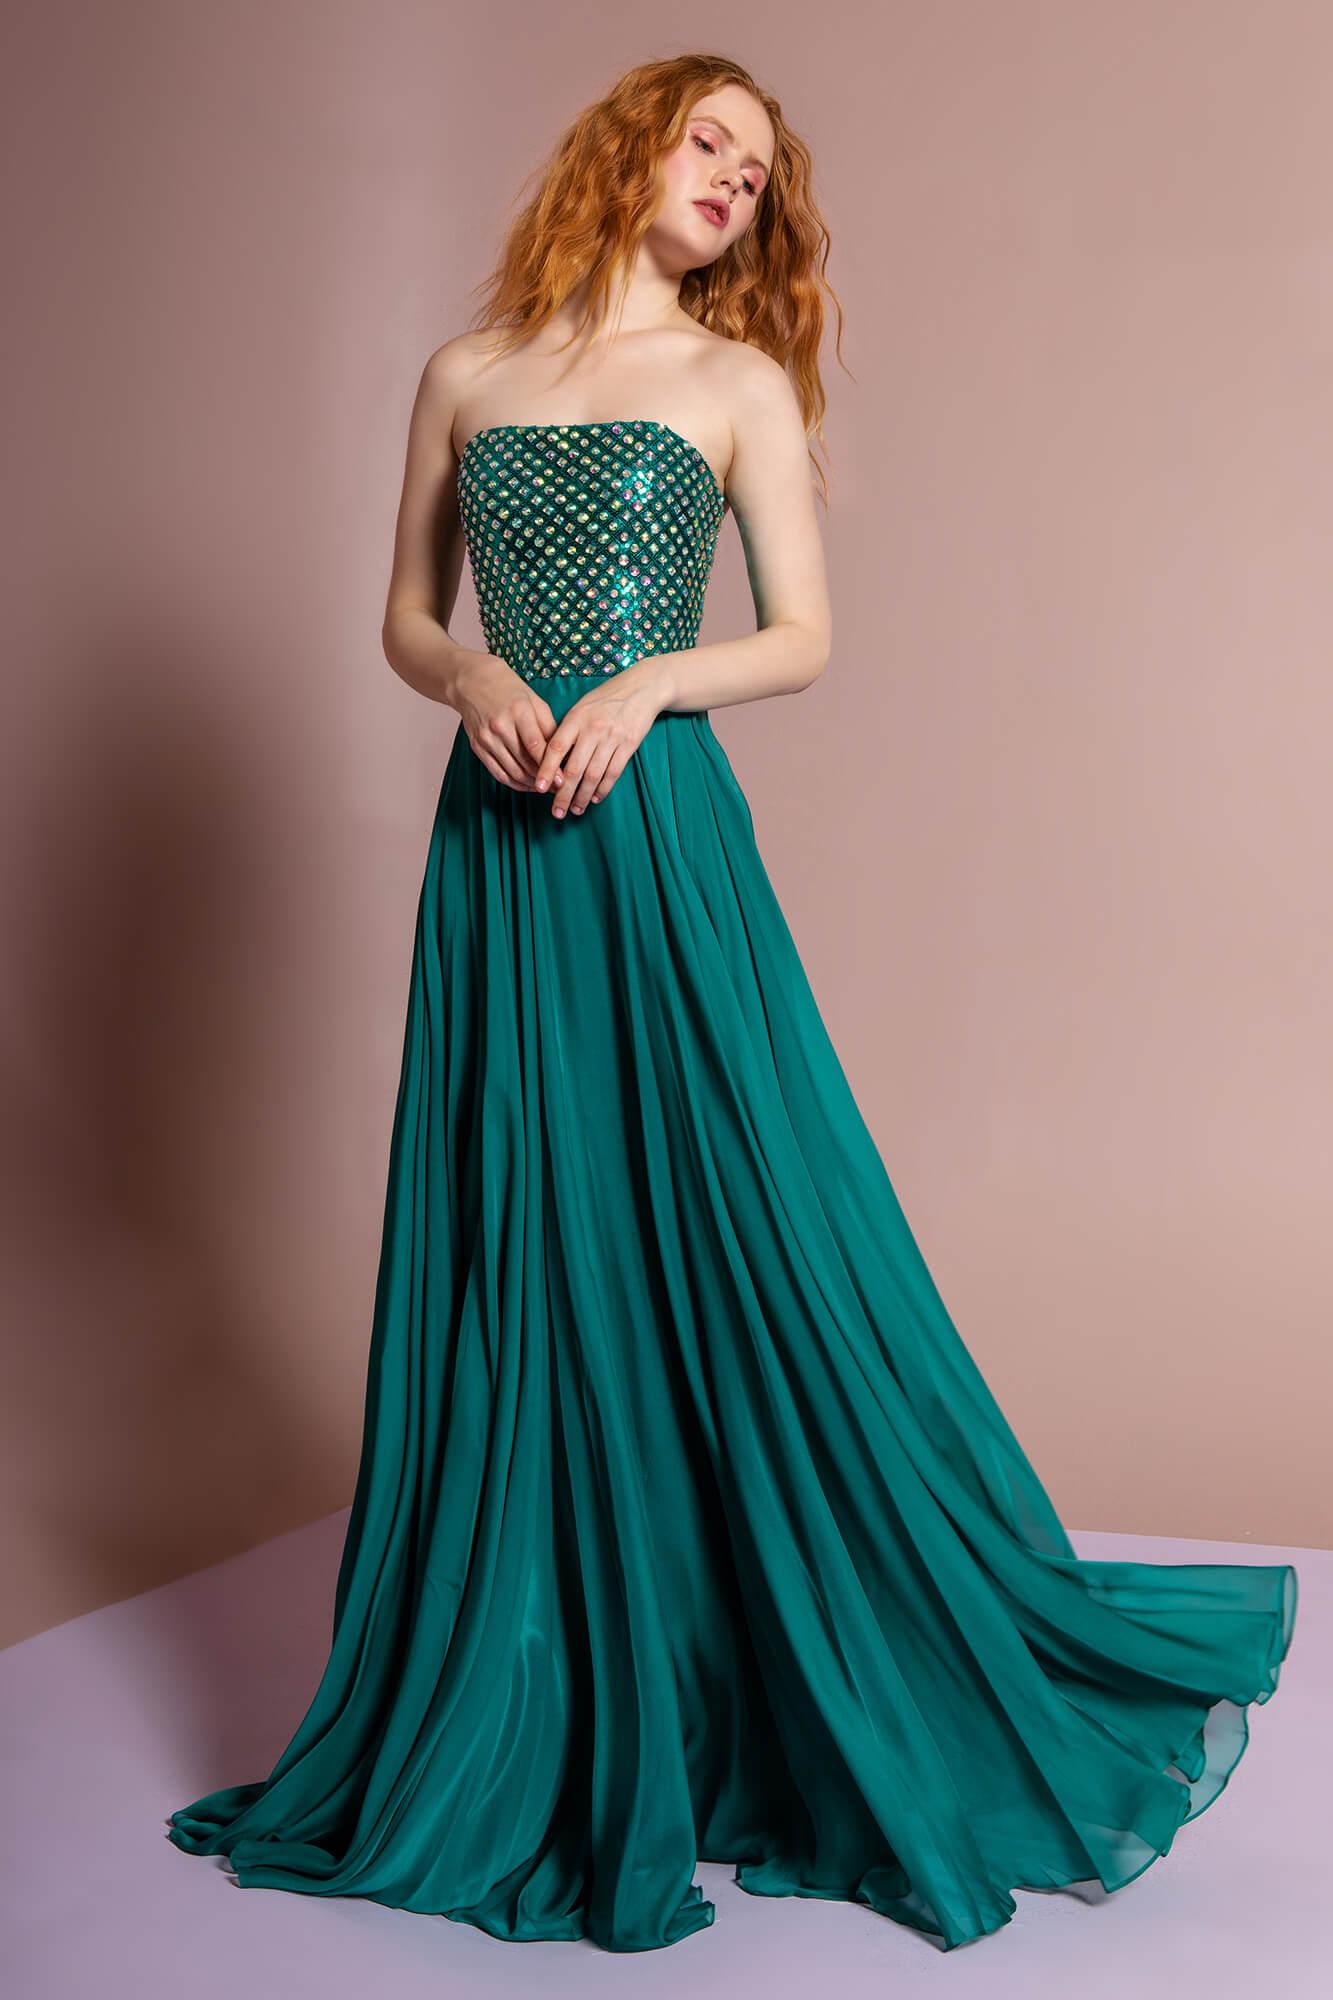 Prom Long Strapless Chiffon Sweetheart Formal Gown - The Dress Outlet Elizabeth K